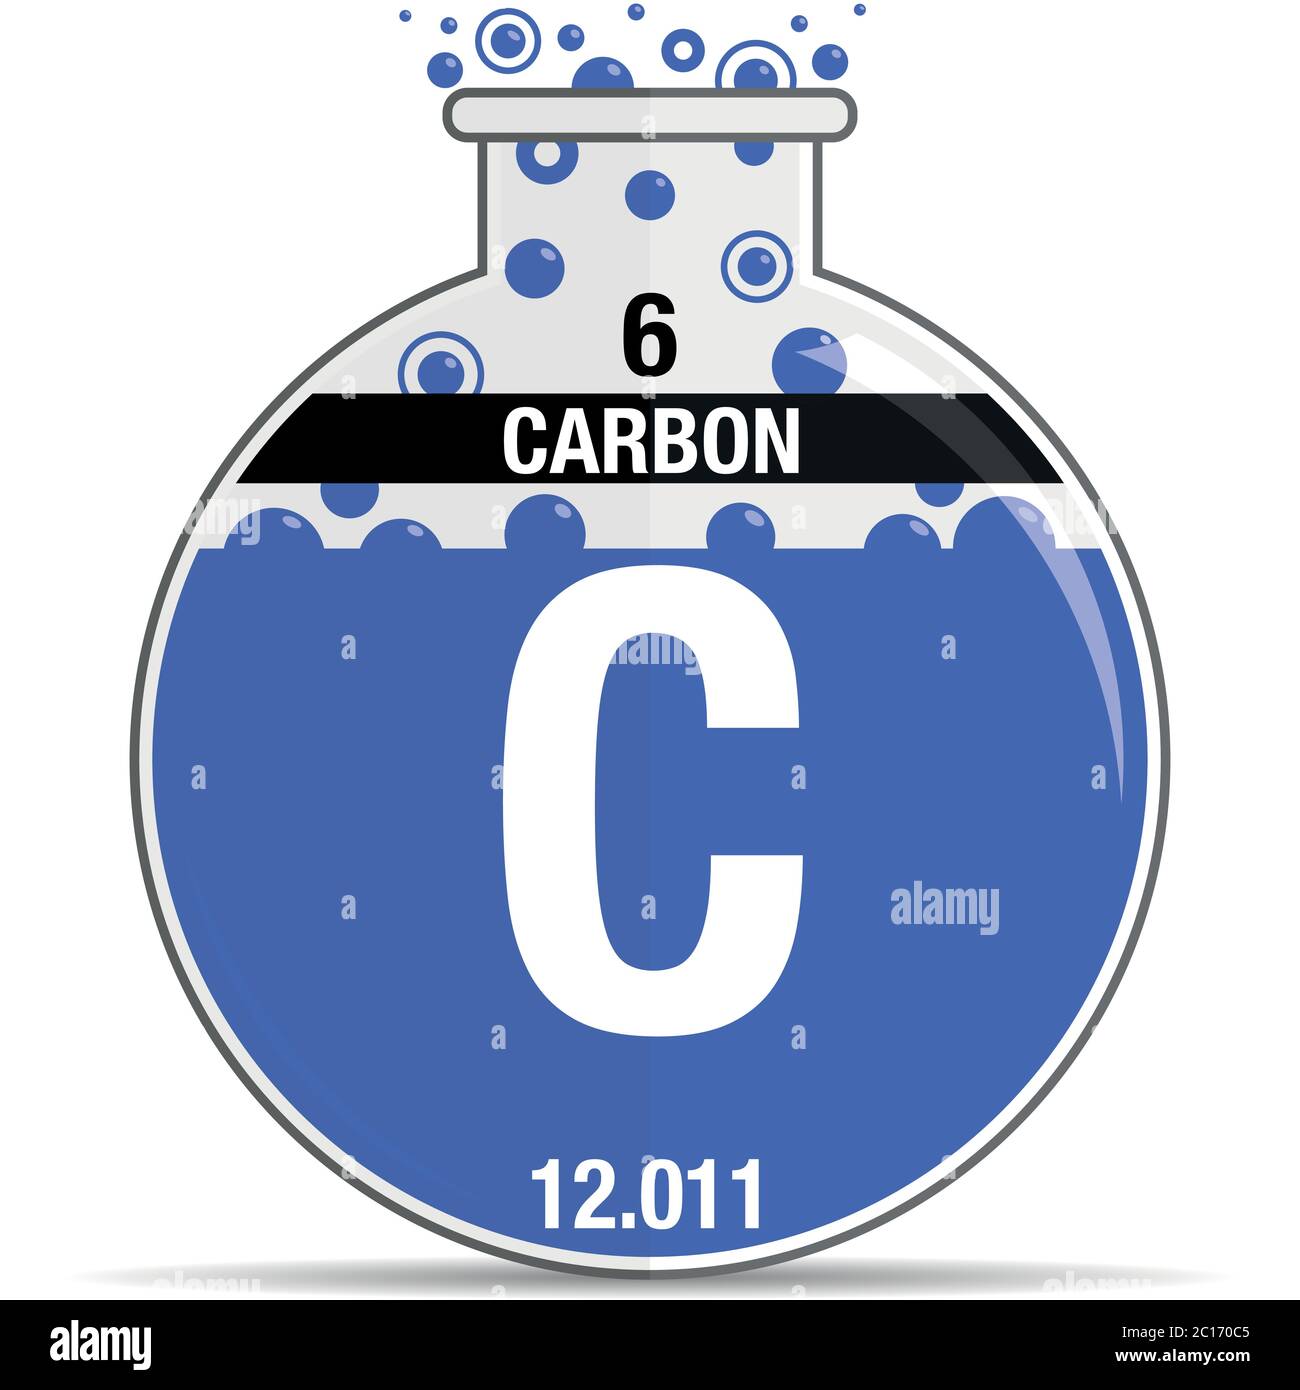 Carbon Symbol On Chemical Round Flask Element Number 6 Of The Periodic